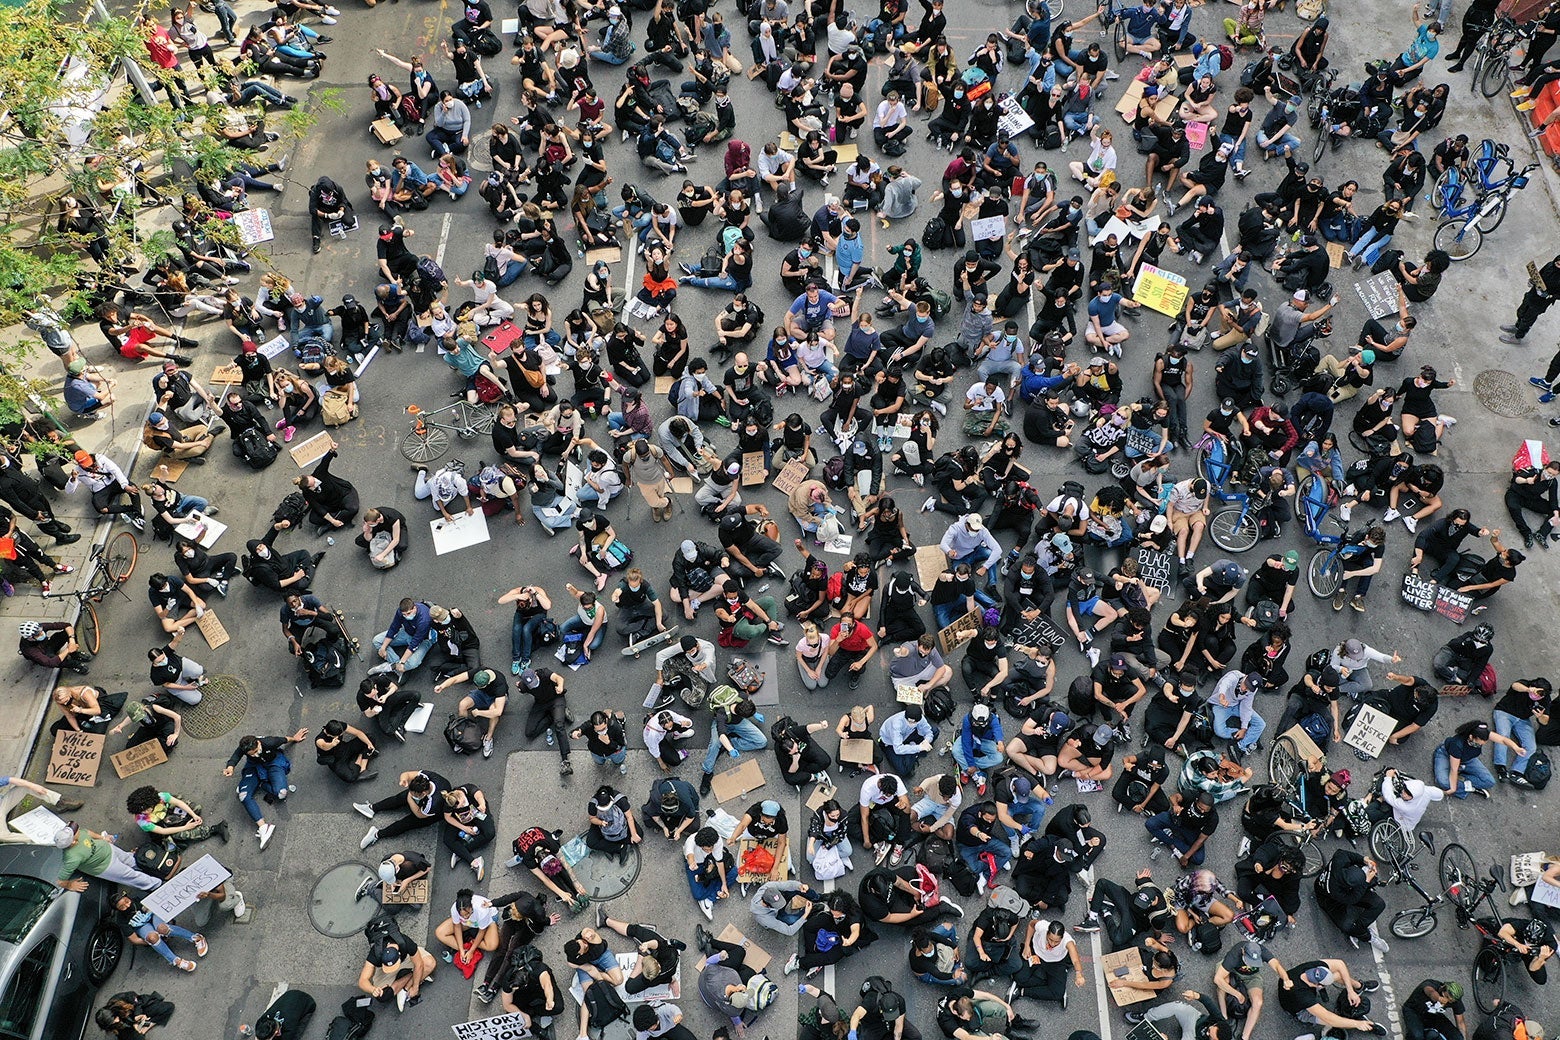 Protesters sit in the road, as seen from above.